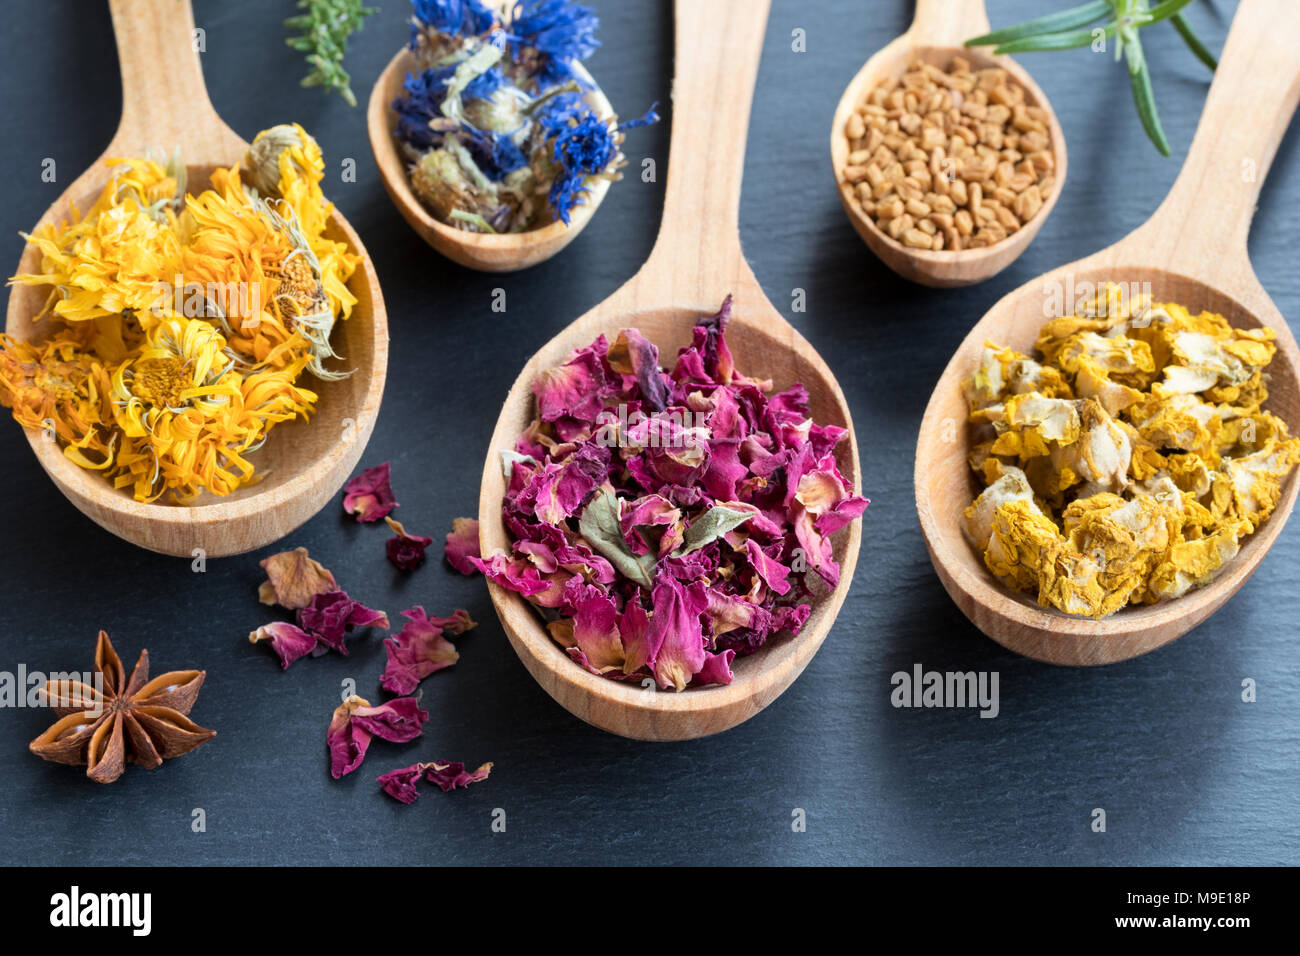 Herbs on wooden spoons on a dark background. Dried calendula, cornflower, rose petals, fenugreek seeds, mullein, star anise, fresh rosemary and thyme. Stock Photo